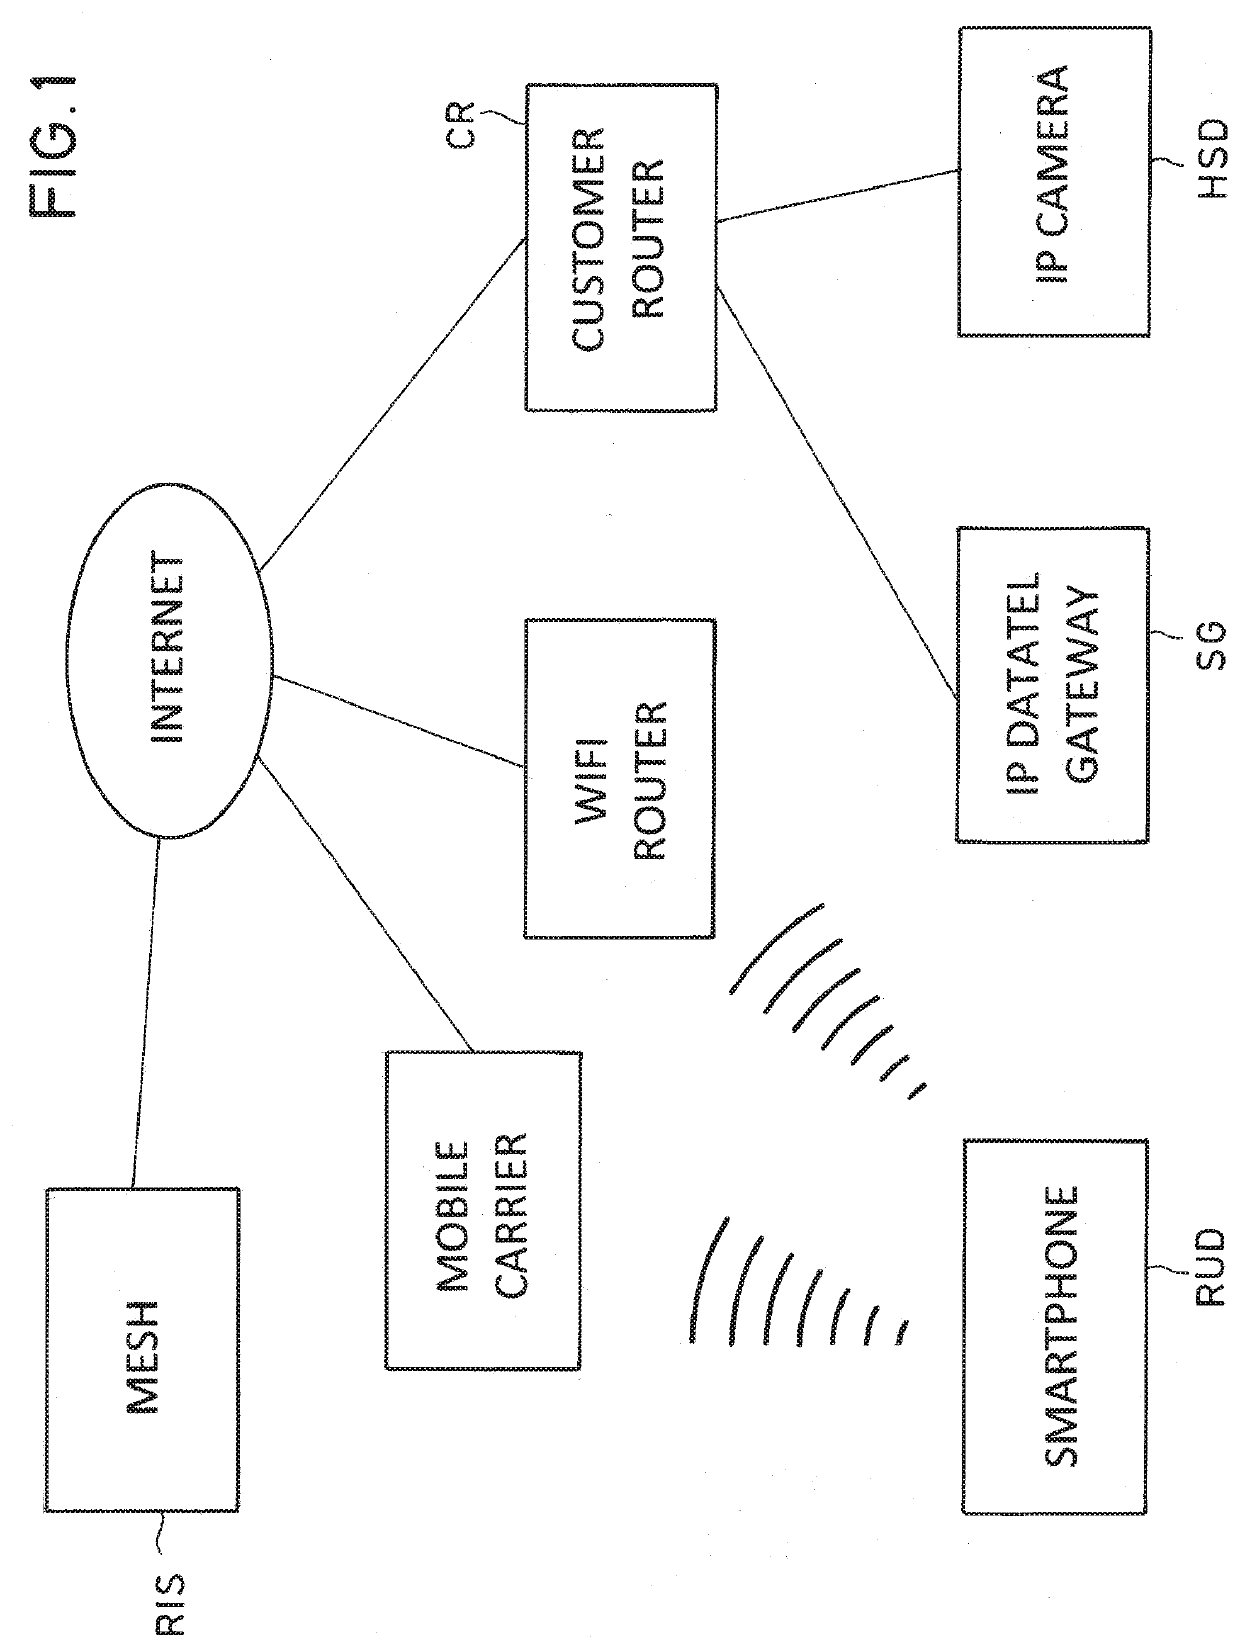 Method and apparatus for facilitating accessing home surveillance data by remote devices